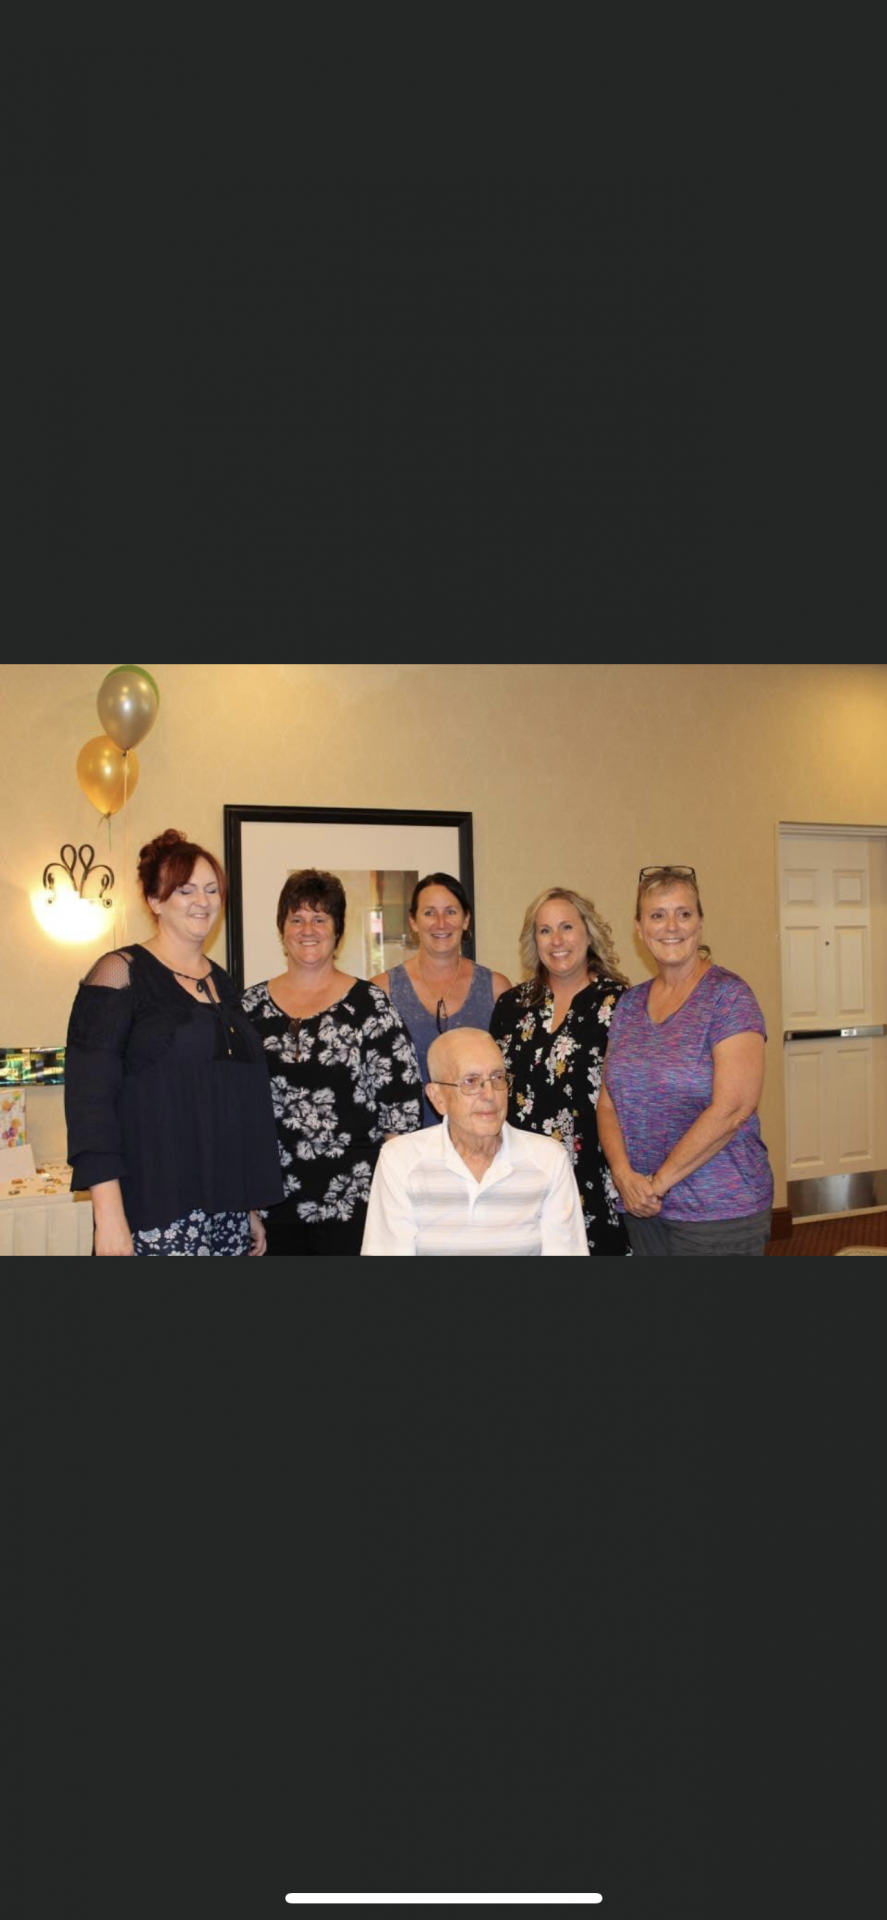 Daddy at his 80th Birthday! We love and miss you daddy!